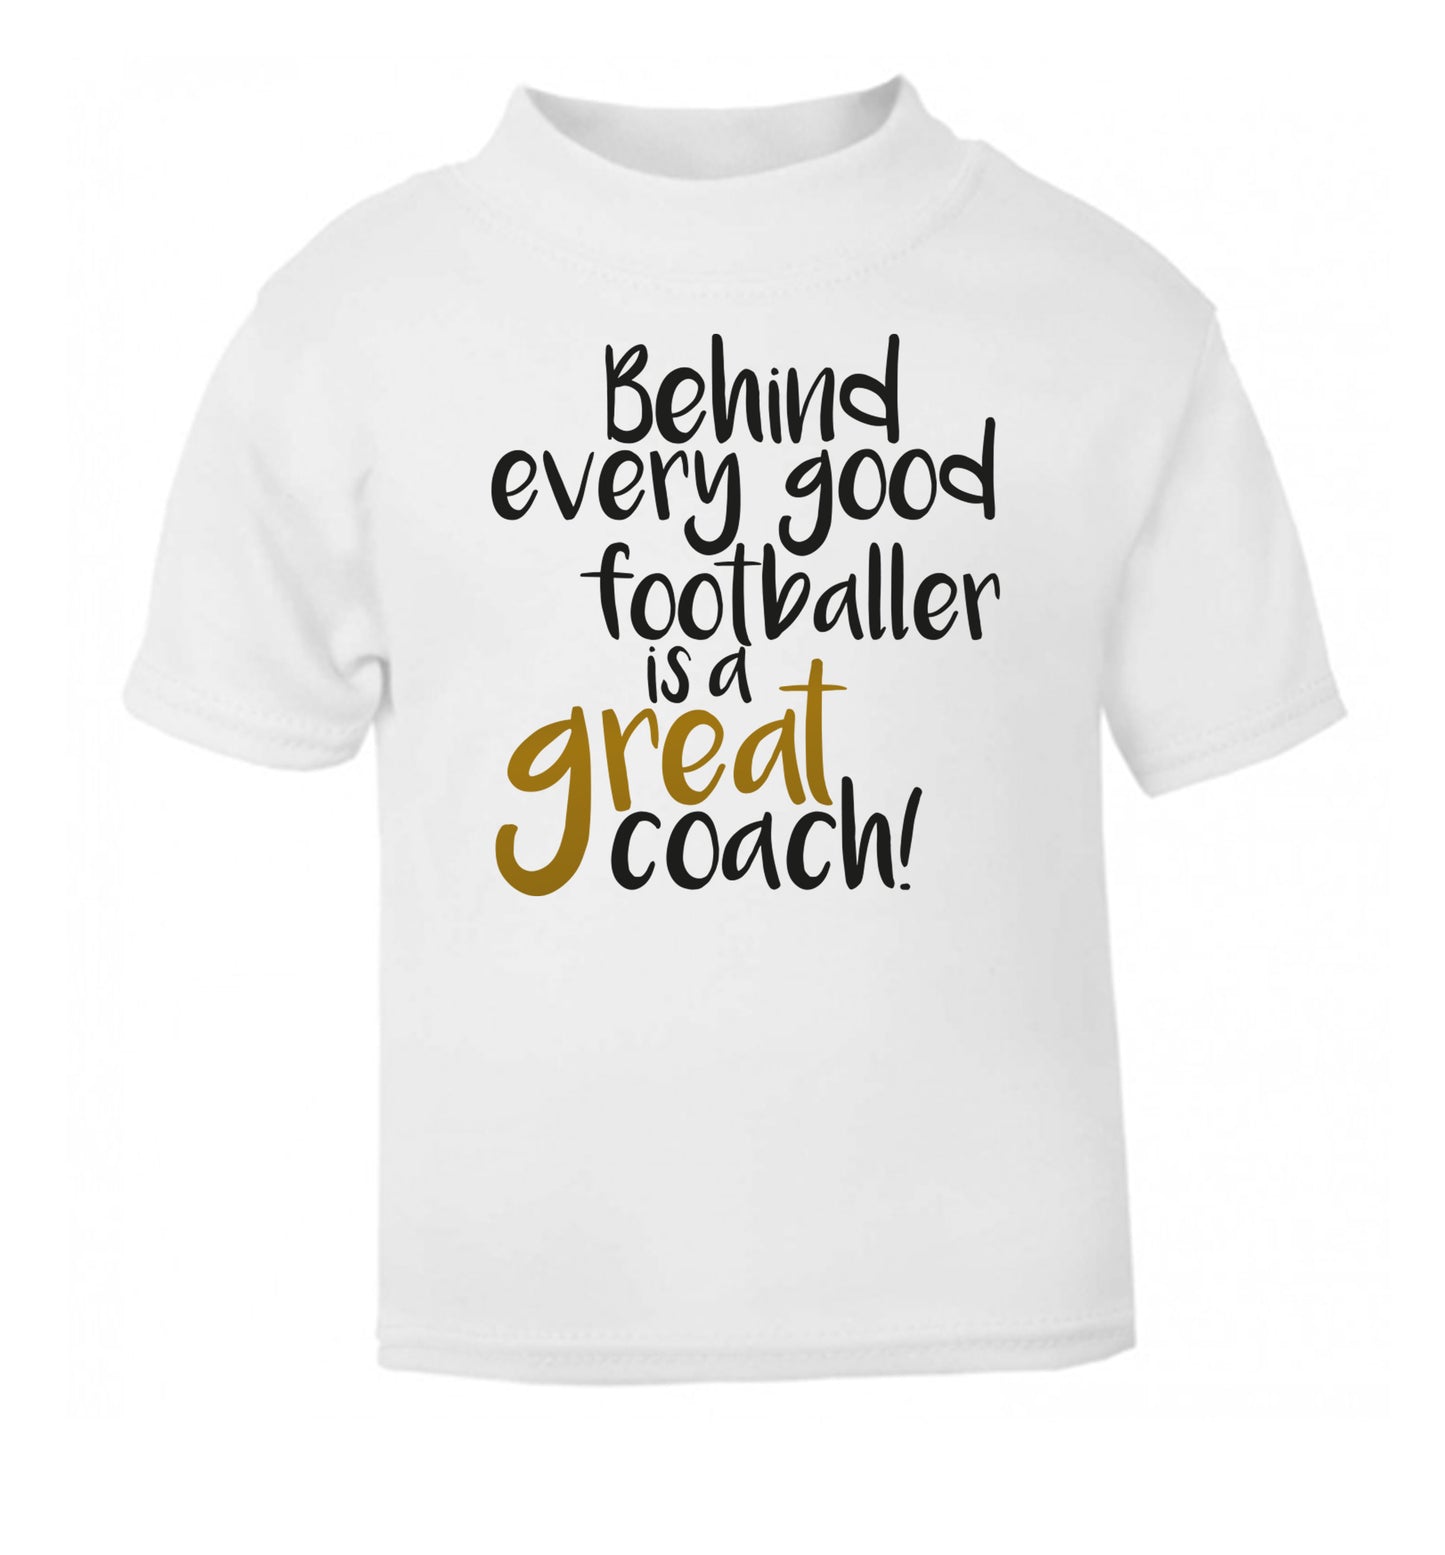 Behind every good footballer is a great coach! white Baby Toddler Tshirt 2 Years